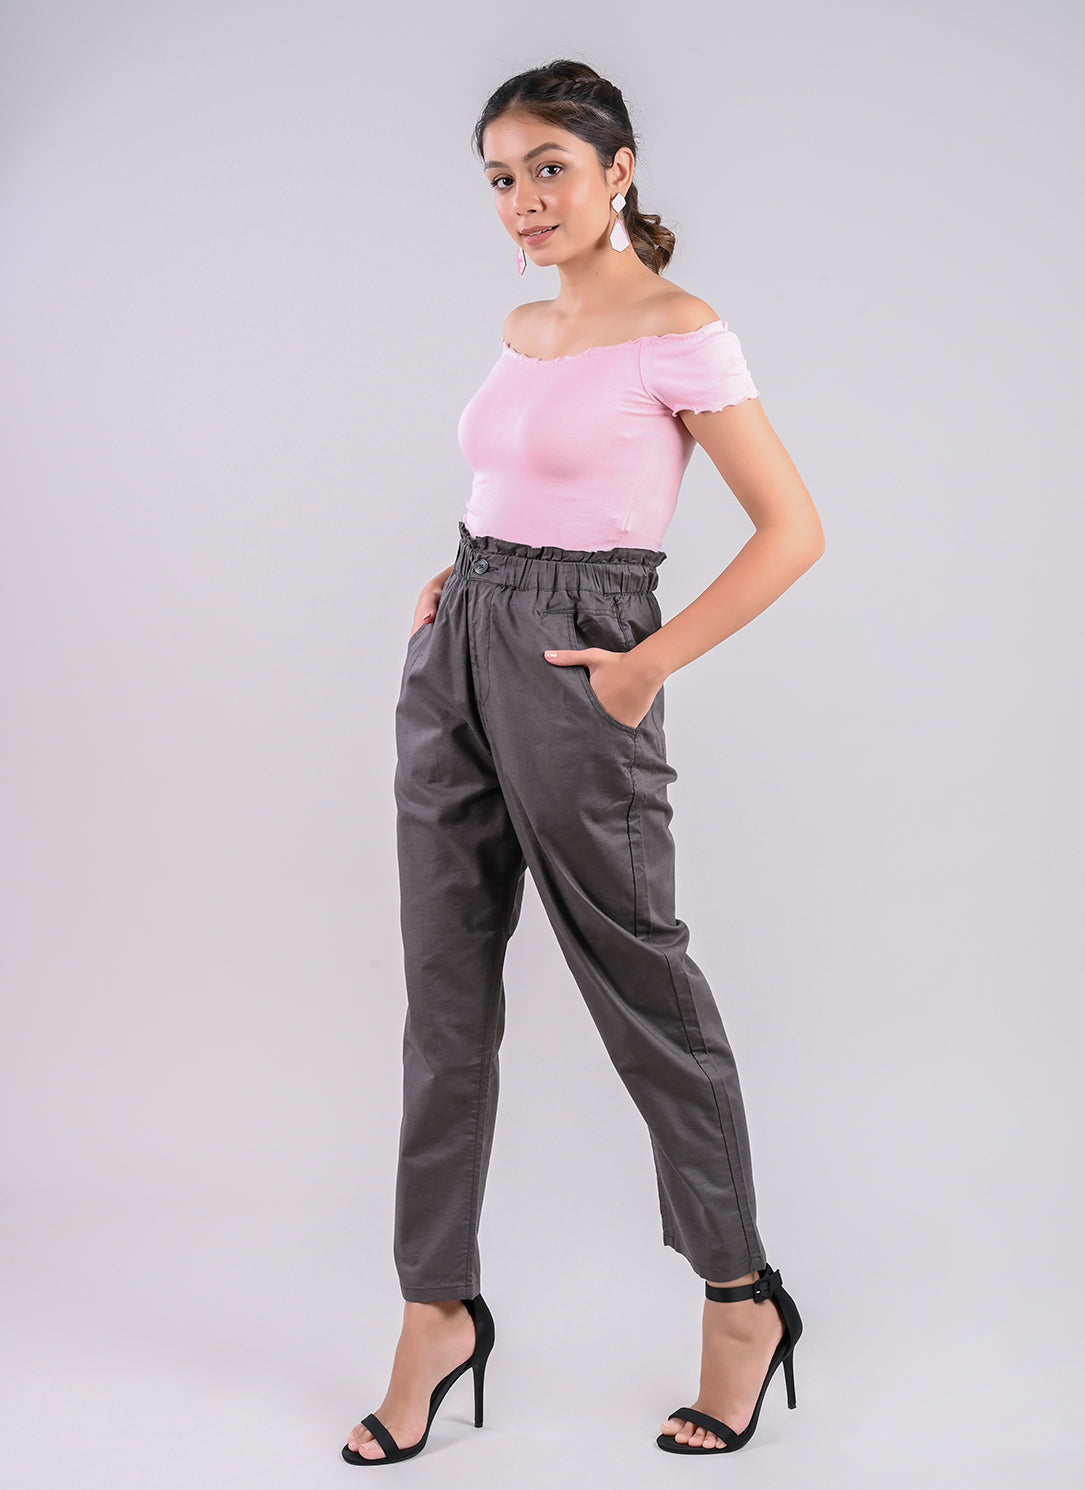 BREEZY PANTS IN GREY WITH PAPERBAG WAIST